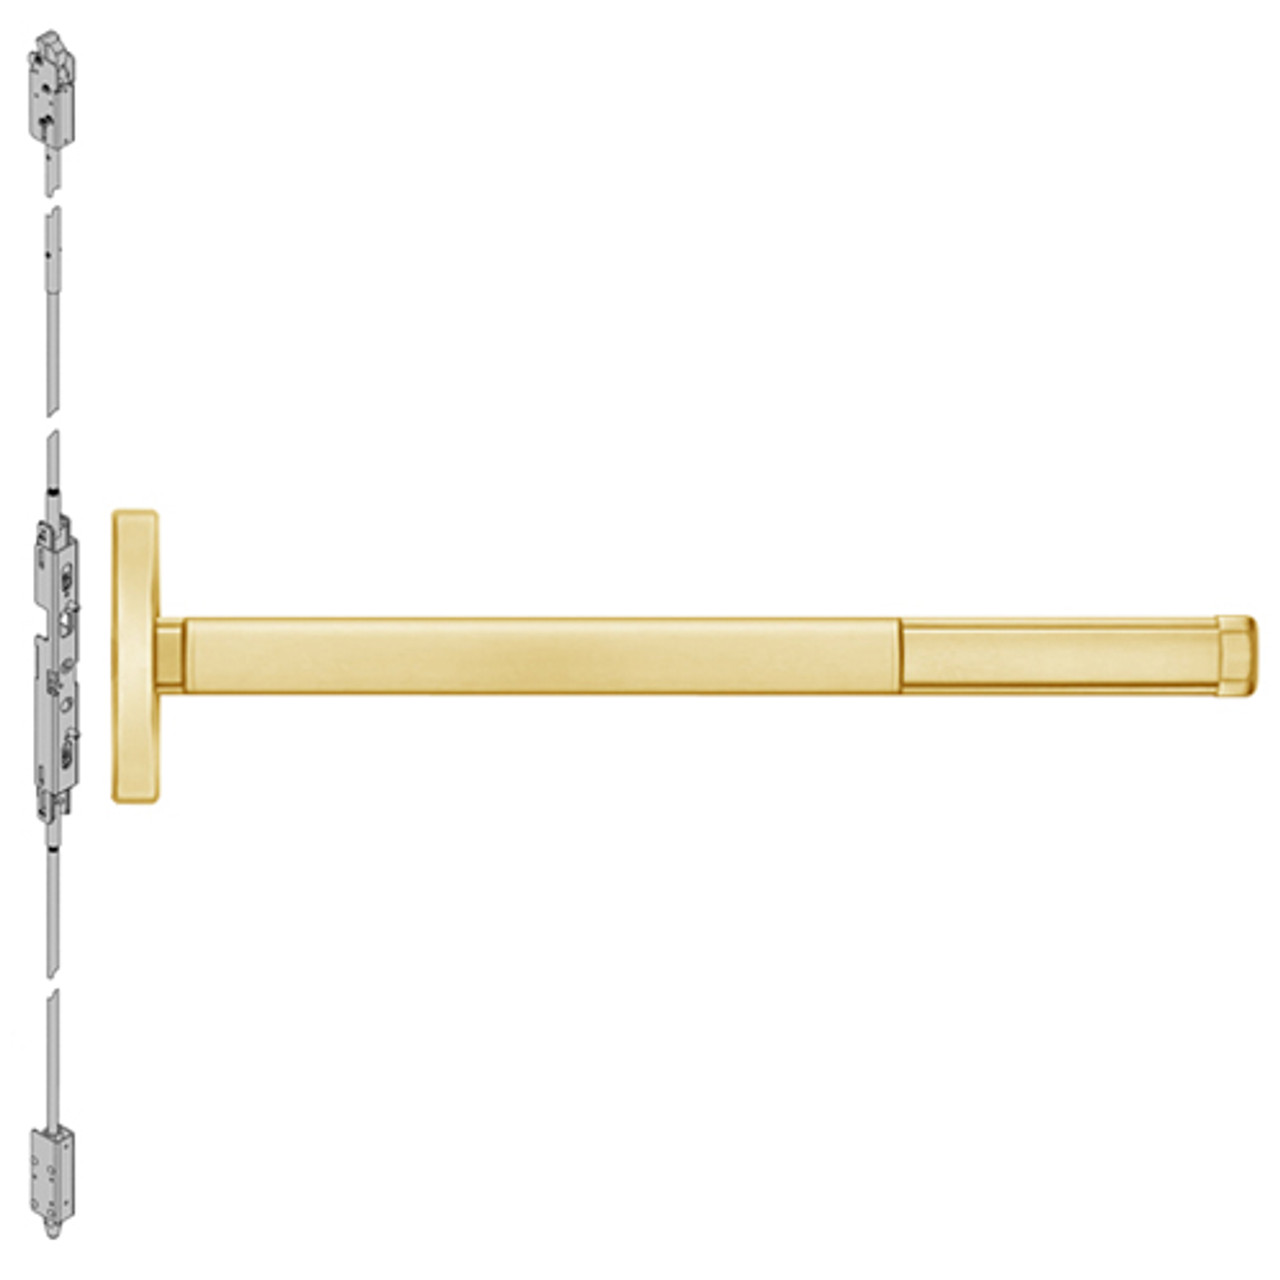 FL2602LBR-605-48 PHI 2600 Series Fire Rated Concealed Vertical Rod Exit Device Prepped for Dummy Trim with Less Bottom Rod in Bright Brass Finish